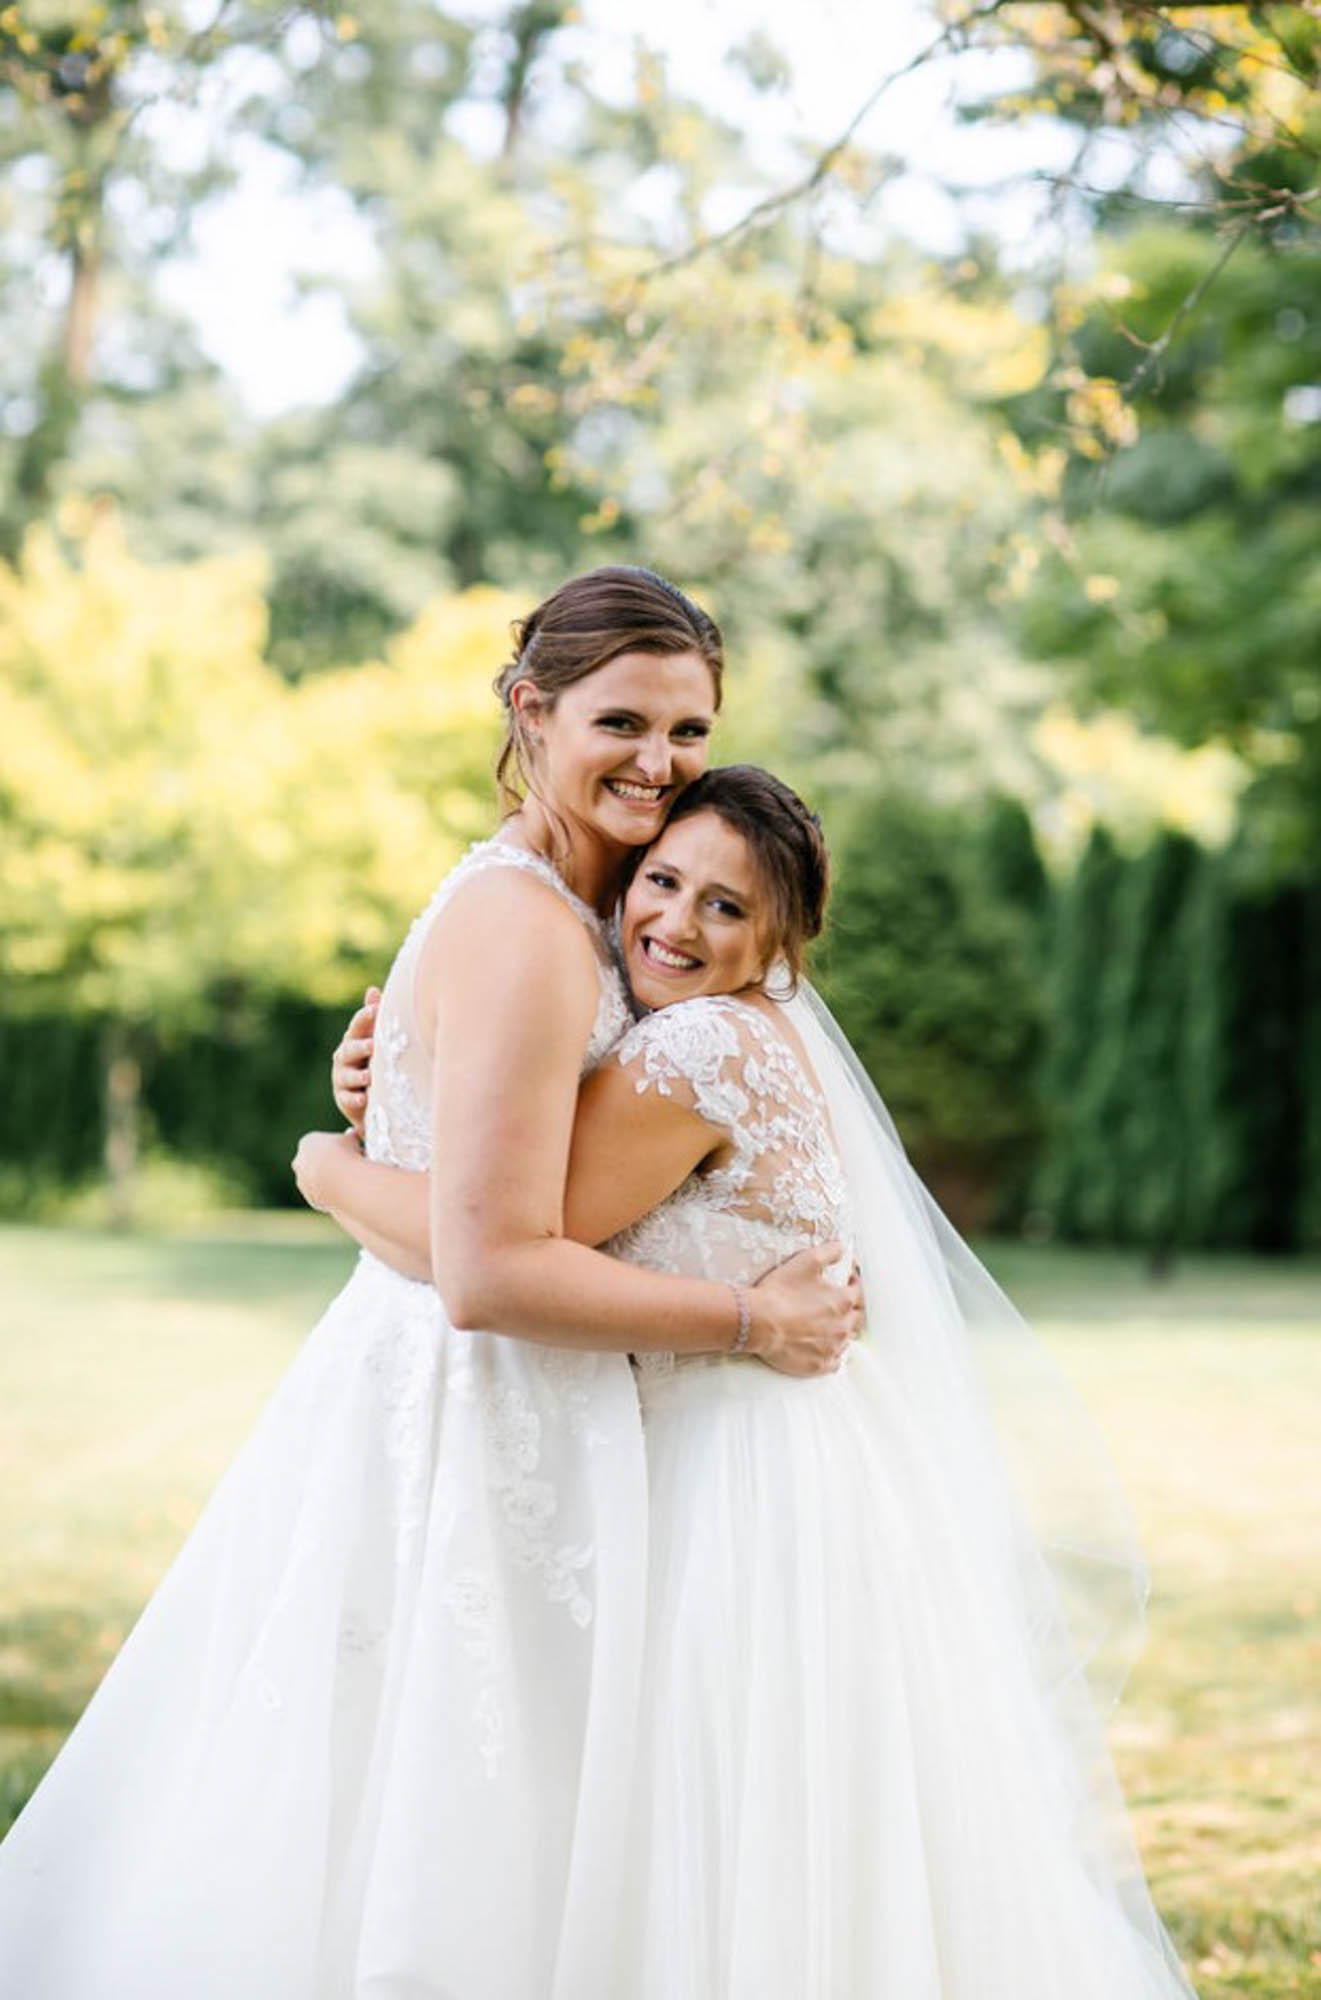 Celebrating six years of marriage equality | Anna Zajac | Featured on Equally Wed, the leading LGBTQ+ wedding magazine